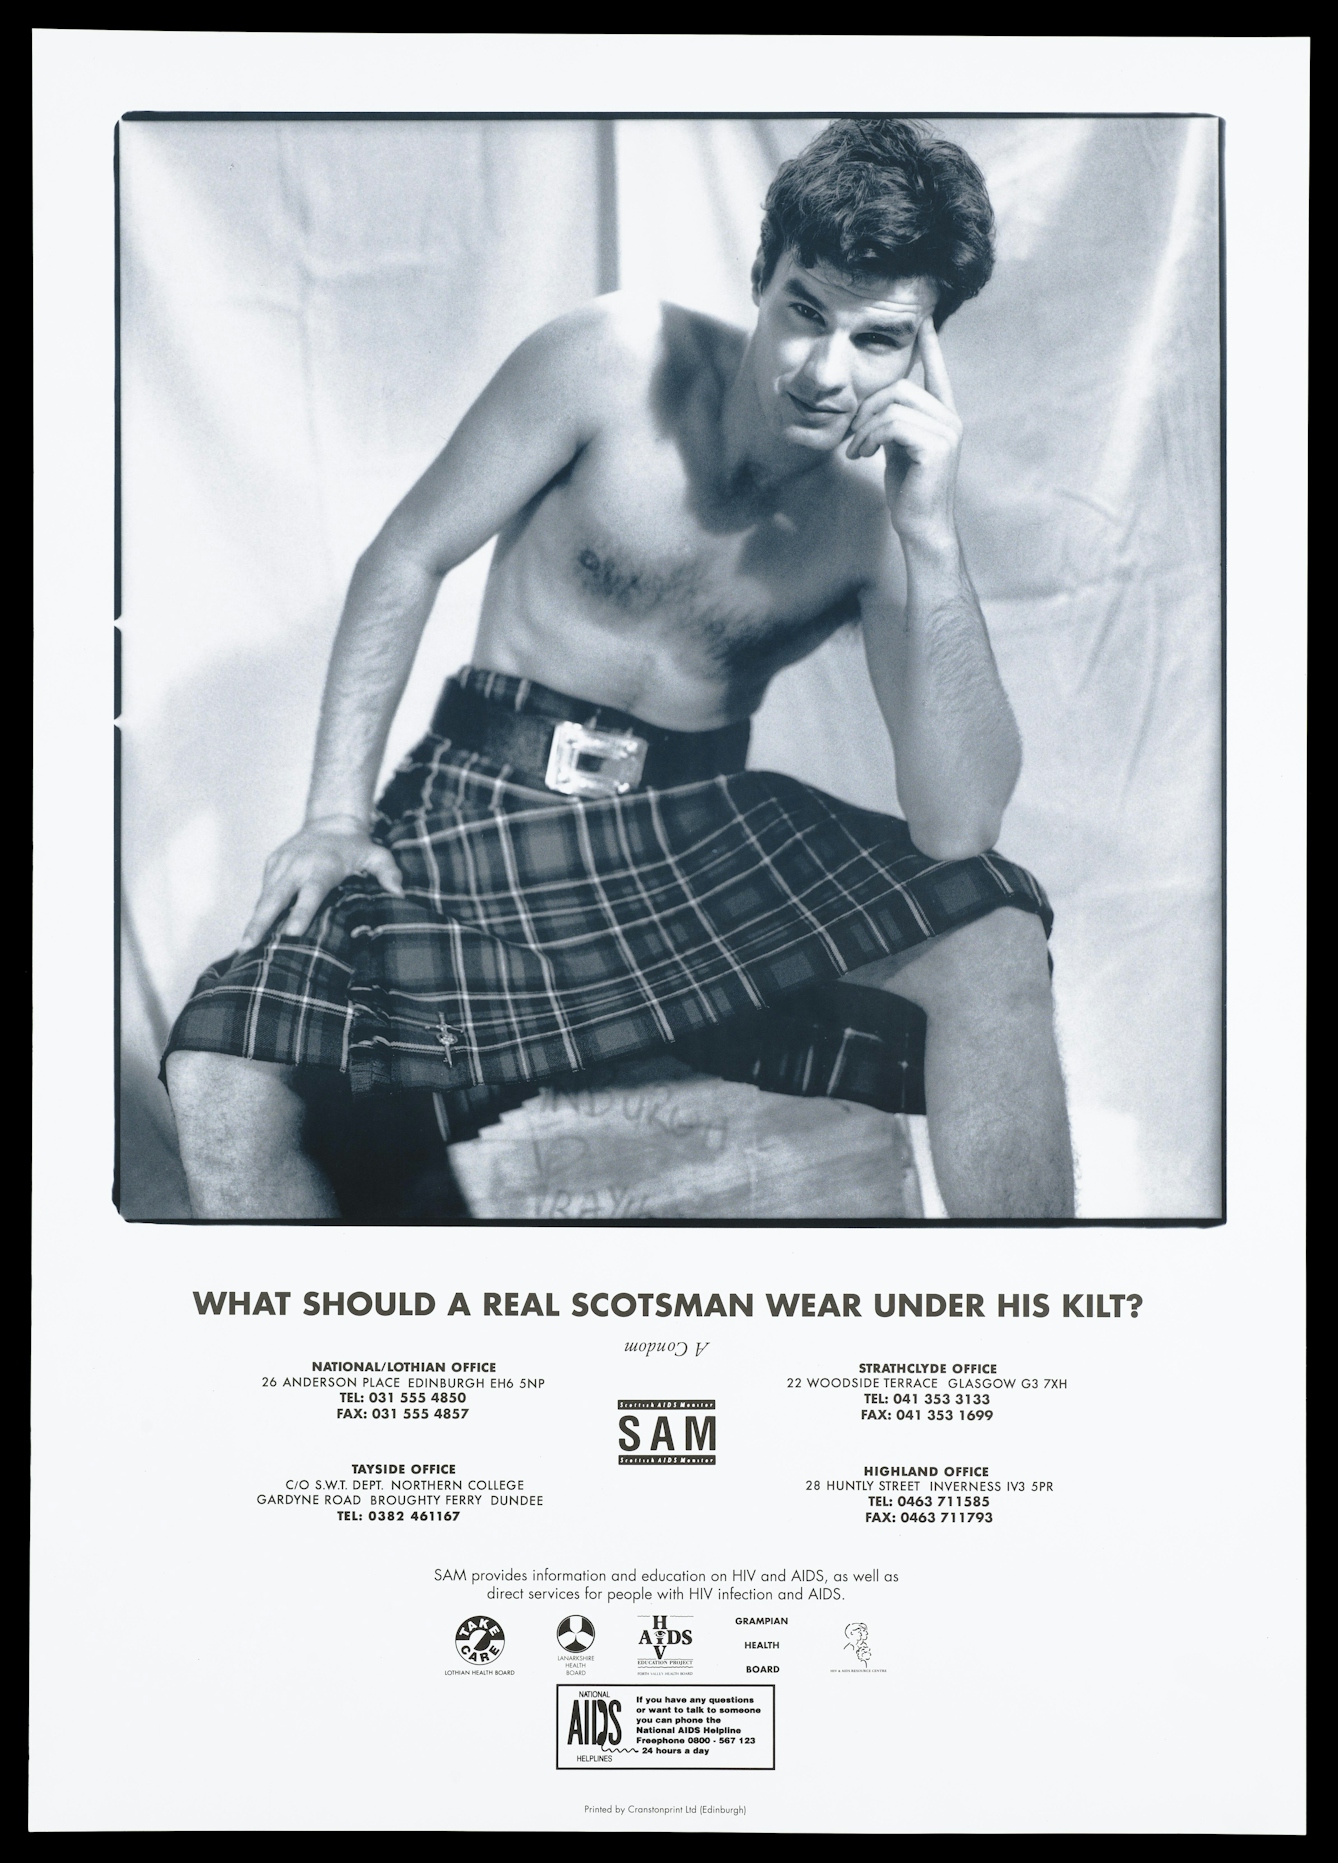 Black and white lithograph featuring a seated bare-chested man wearing a belted kilt. His left elbow rests on his knee, with his hand on his face in a pose reminscent of The Thinker by Rodin. He is smiling and his eyebrows are raised provocatively. The text under the image asks "What does a Scotsman wear under his kilt?" and provides telephone numbers for AIDS organisations and the Scottish Aids Monitor logo. 